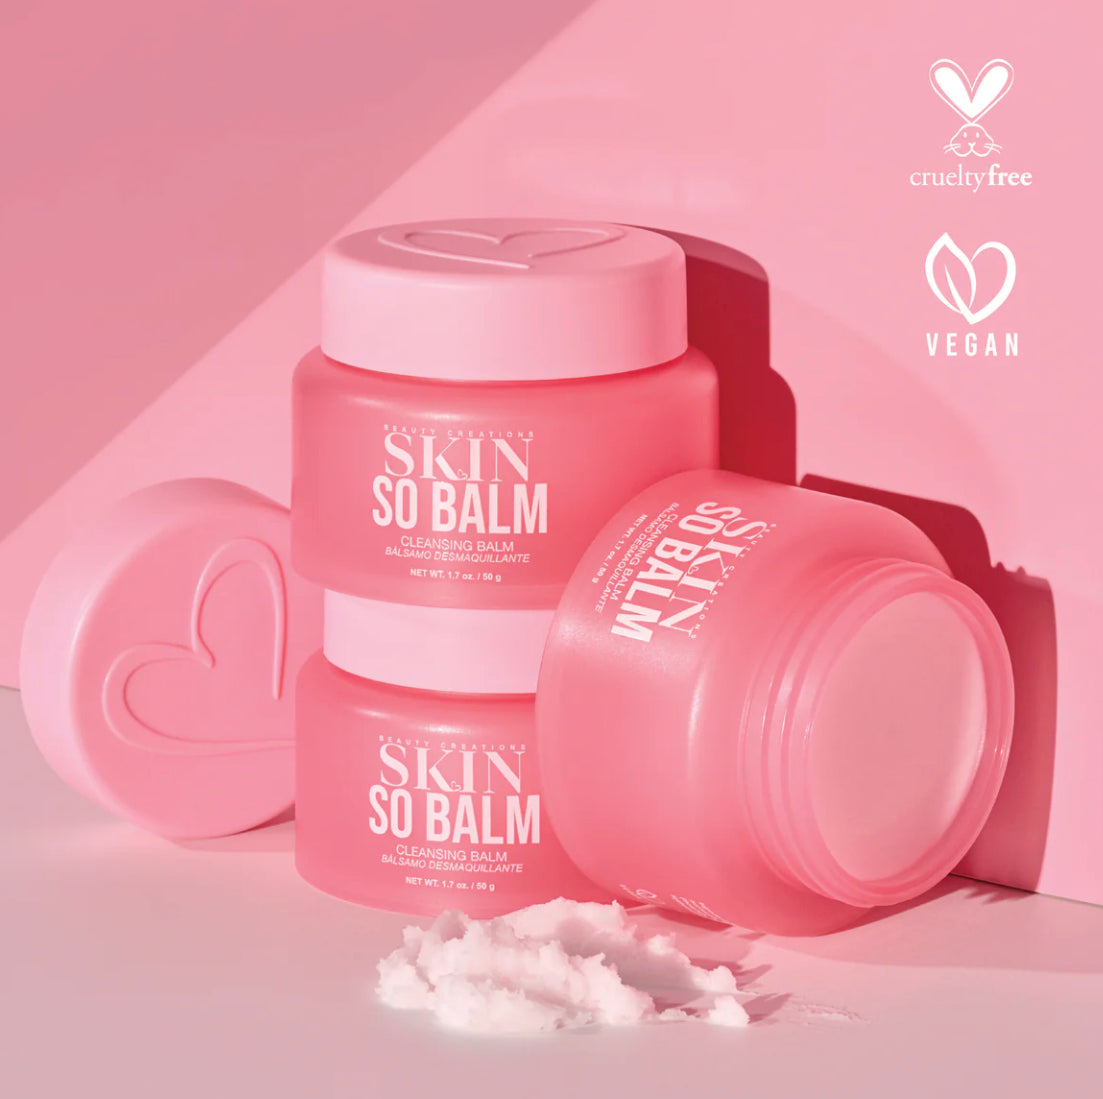 Beauty Creations “ So Balm” Cleansing balm